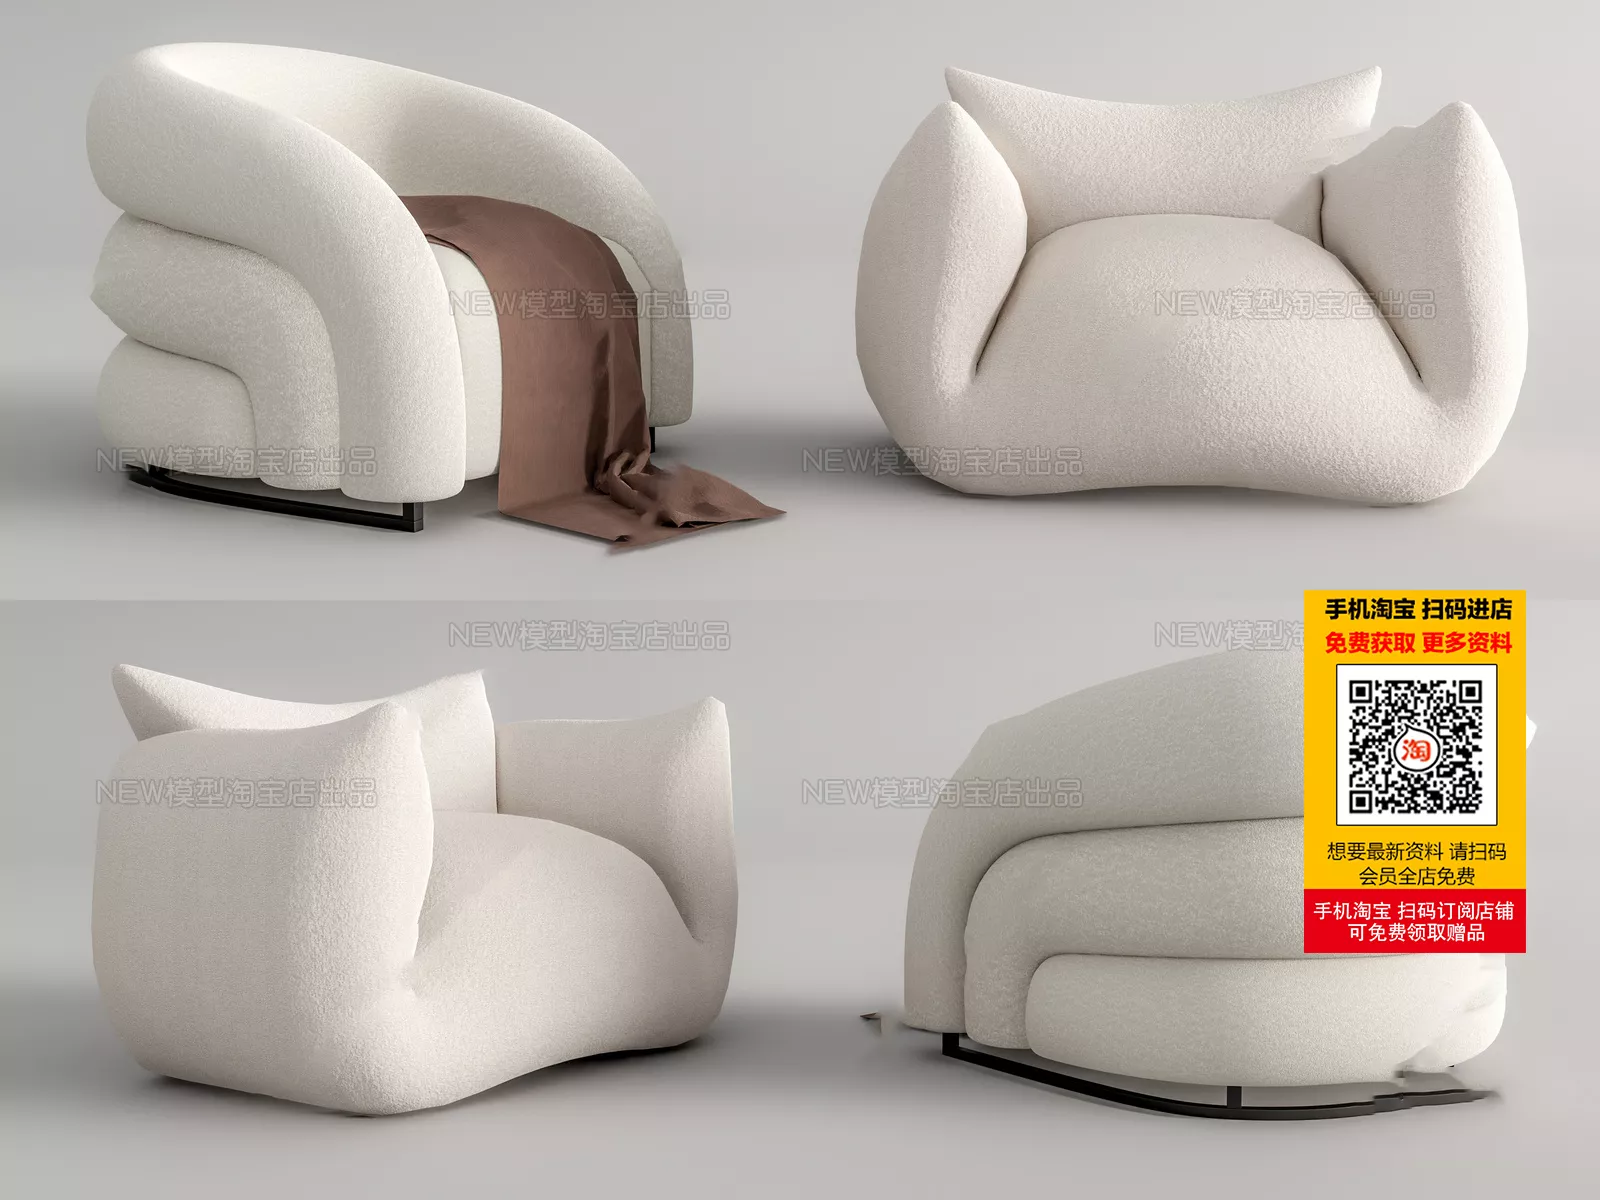 MODERN SOFA - SKETCHUP 3D MODEL - VRAY OR ENSCAPE - ID13165